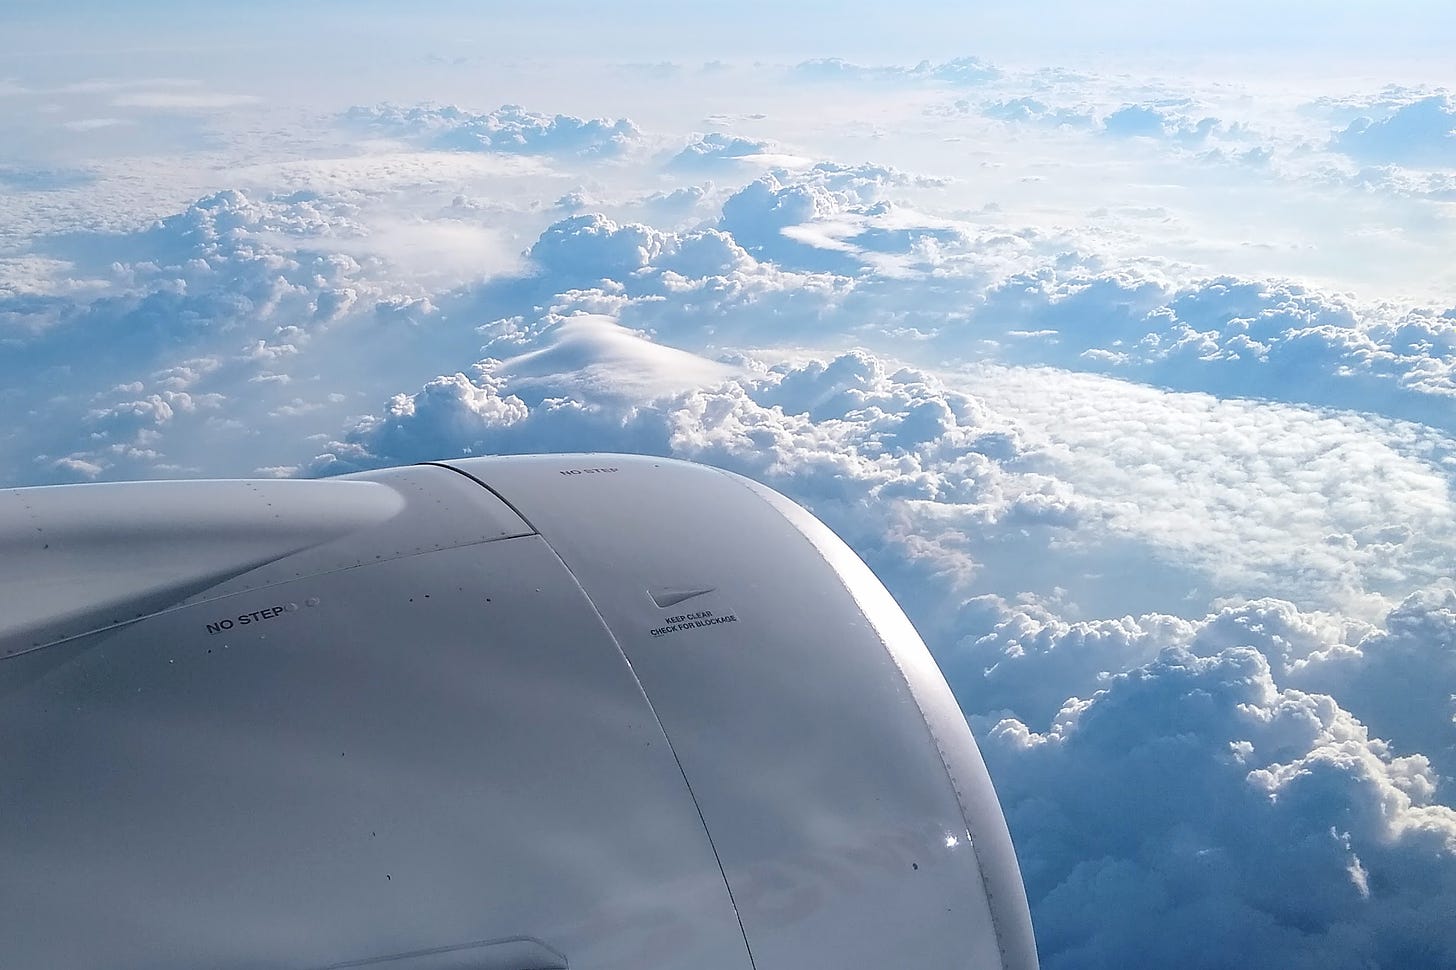 Port side view of a jet engine and cumulus clouds from a passenger airplane window